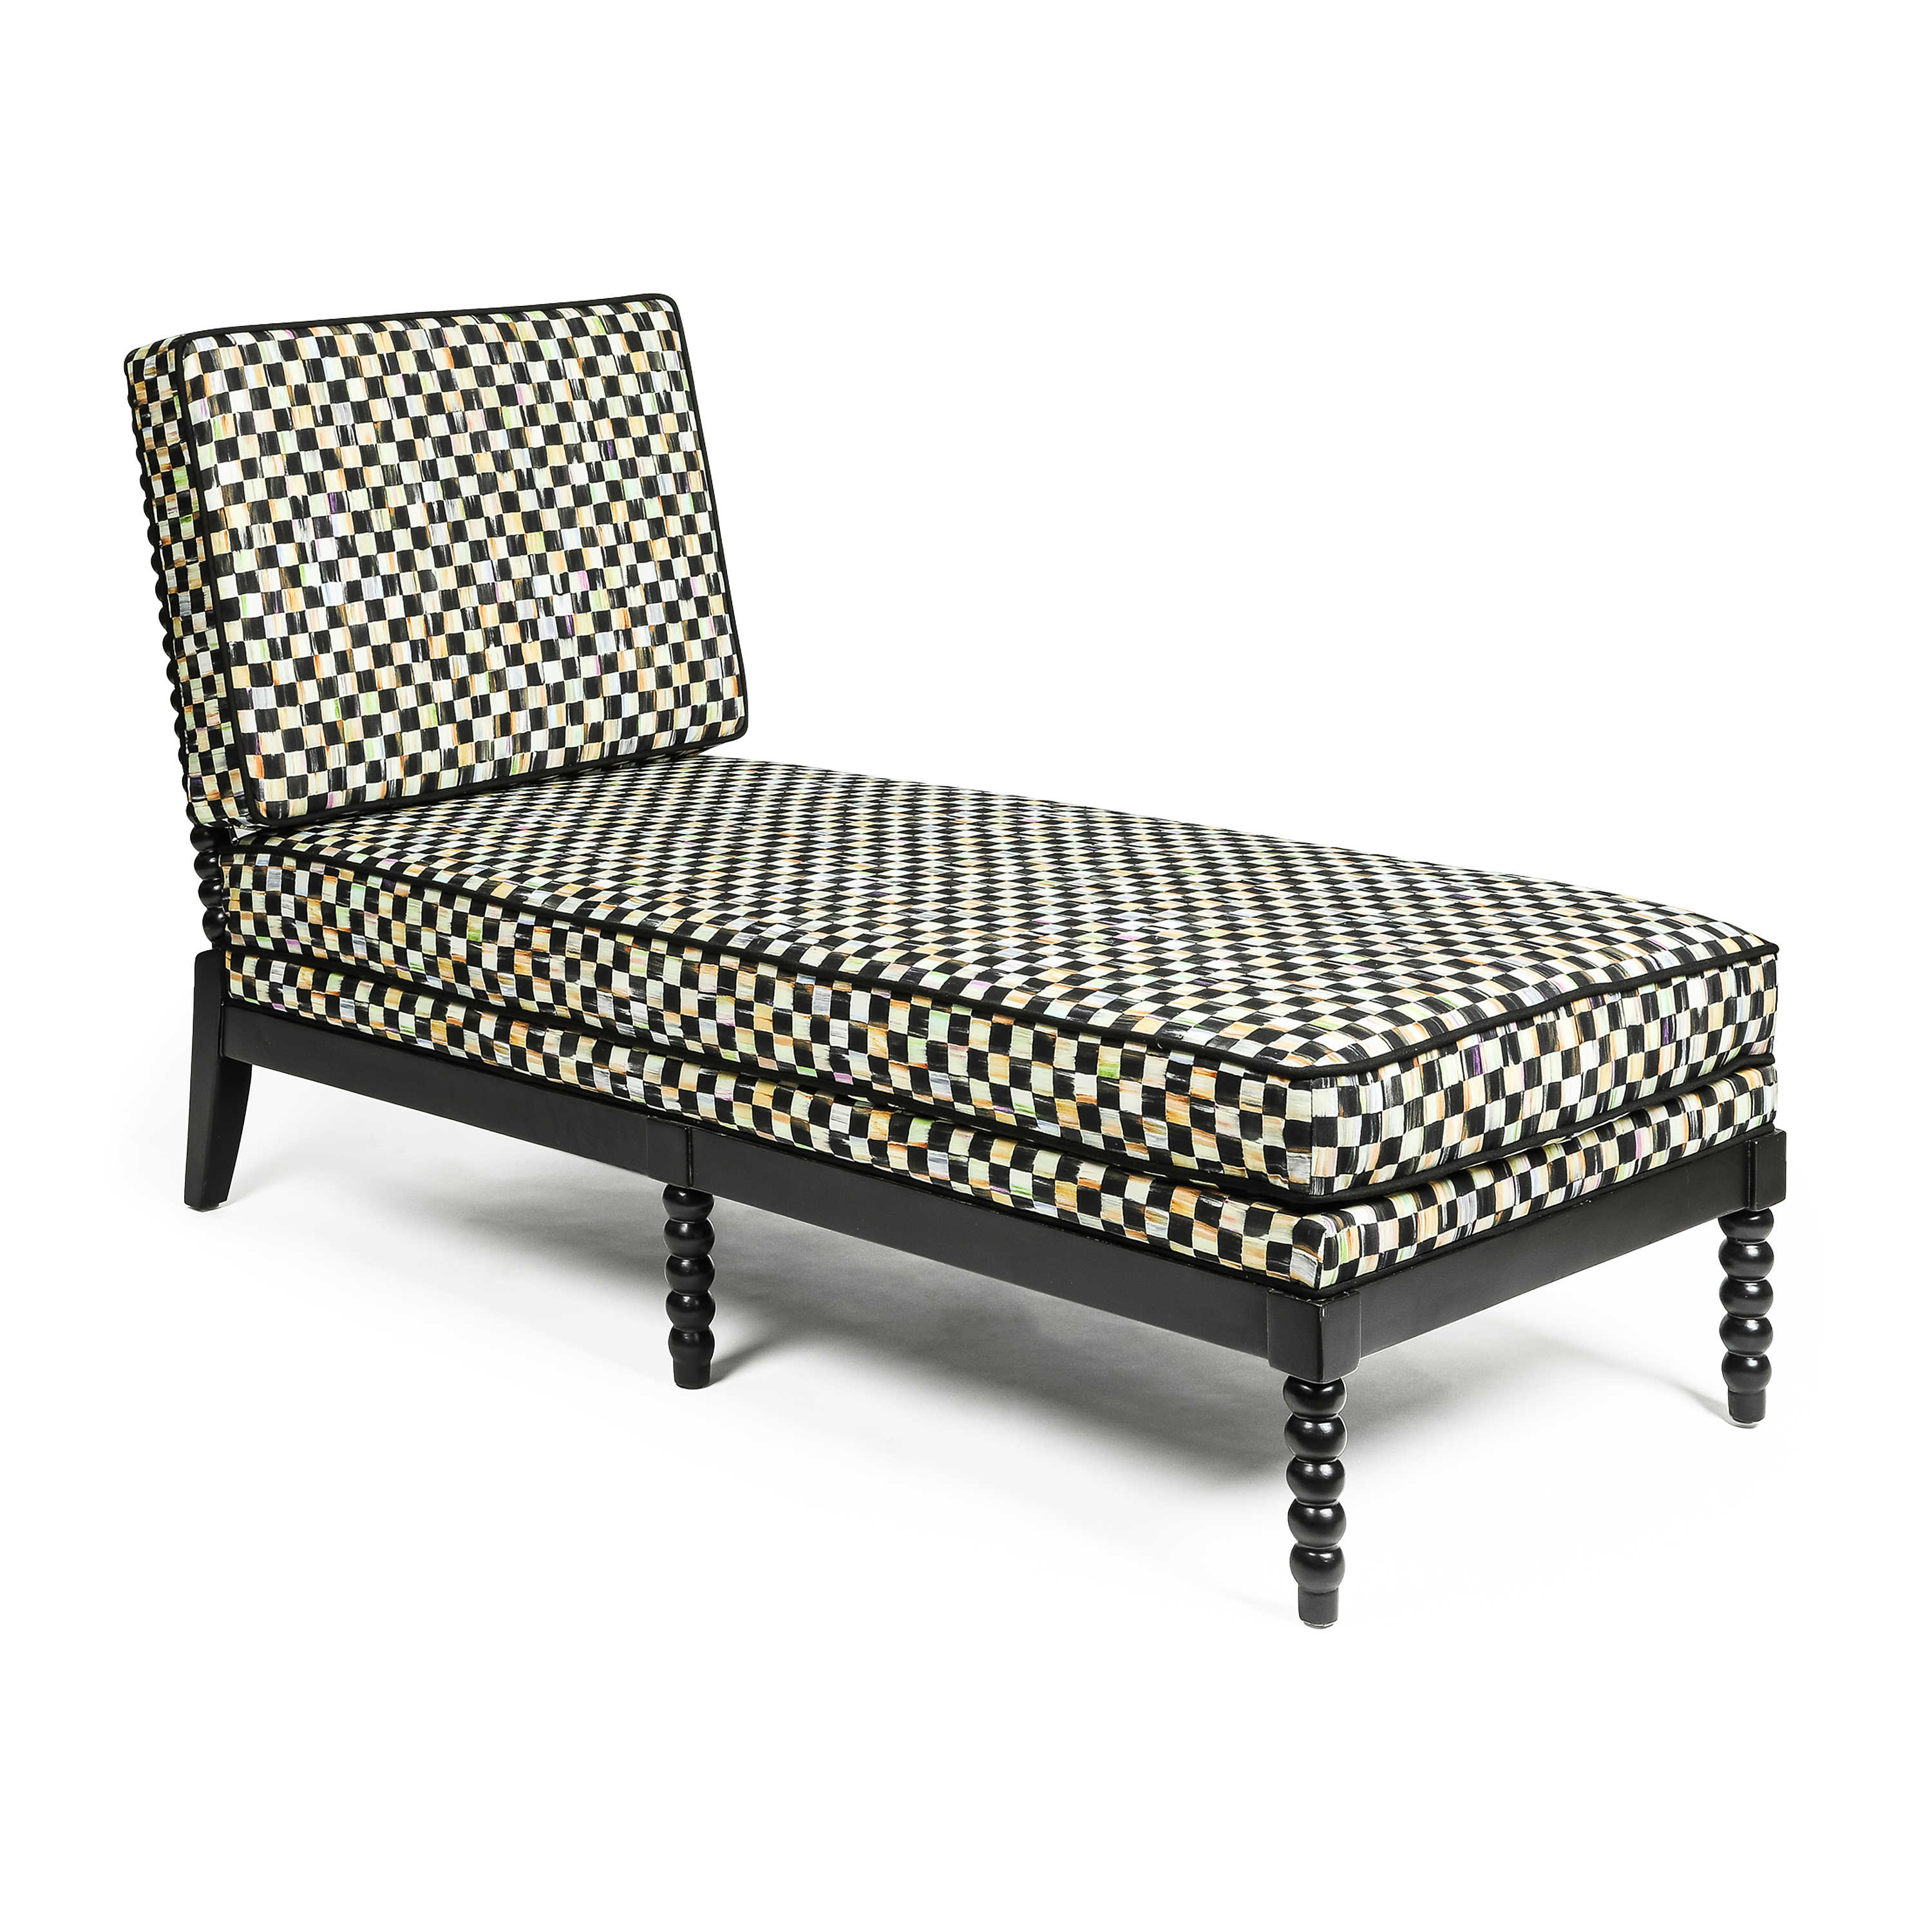 Spindle Check Outdoor Chaise mackenzie-childs Panama 0